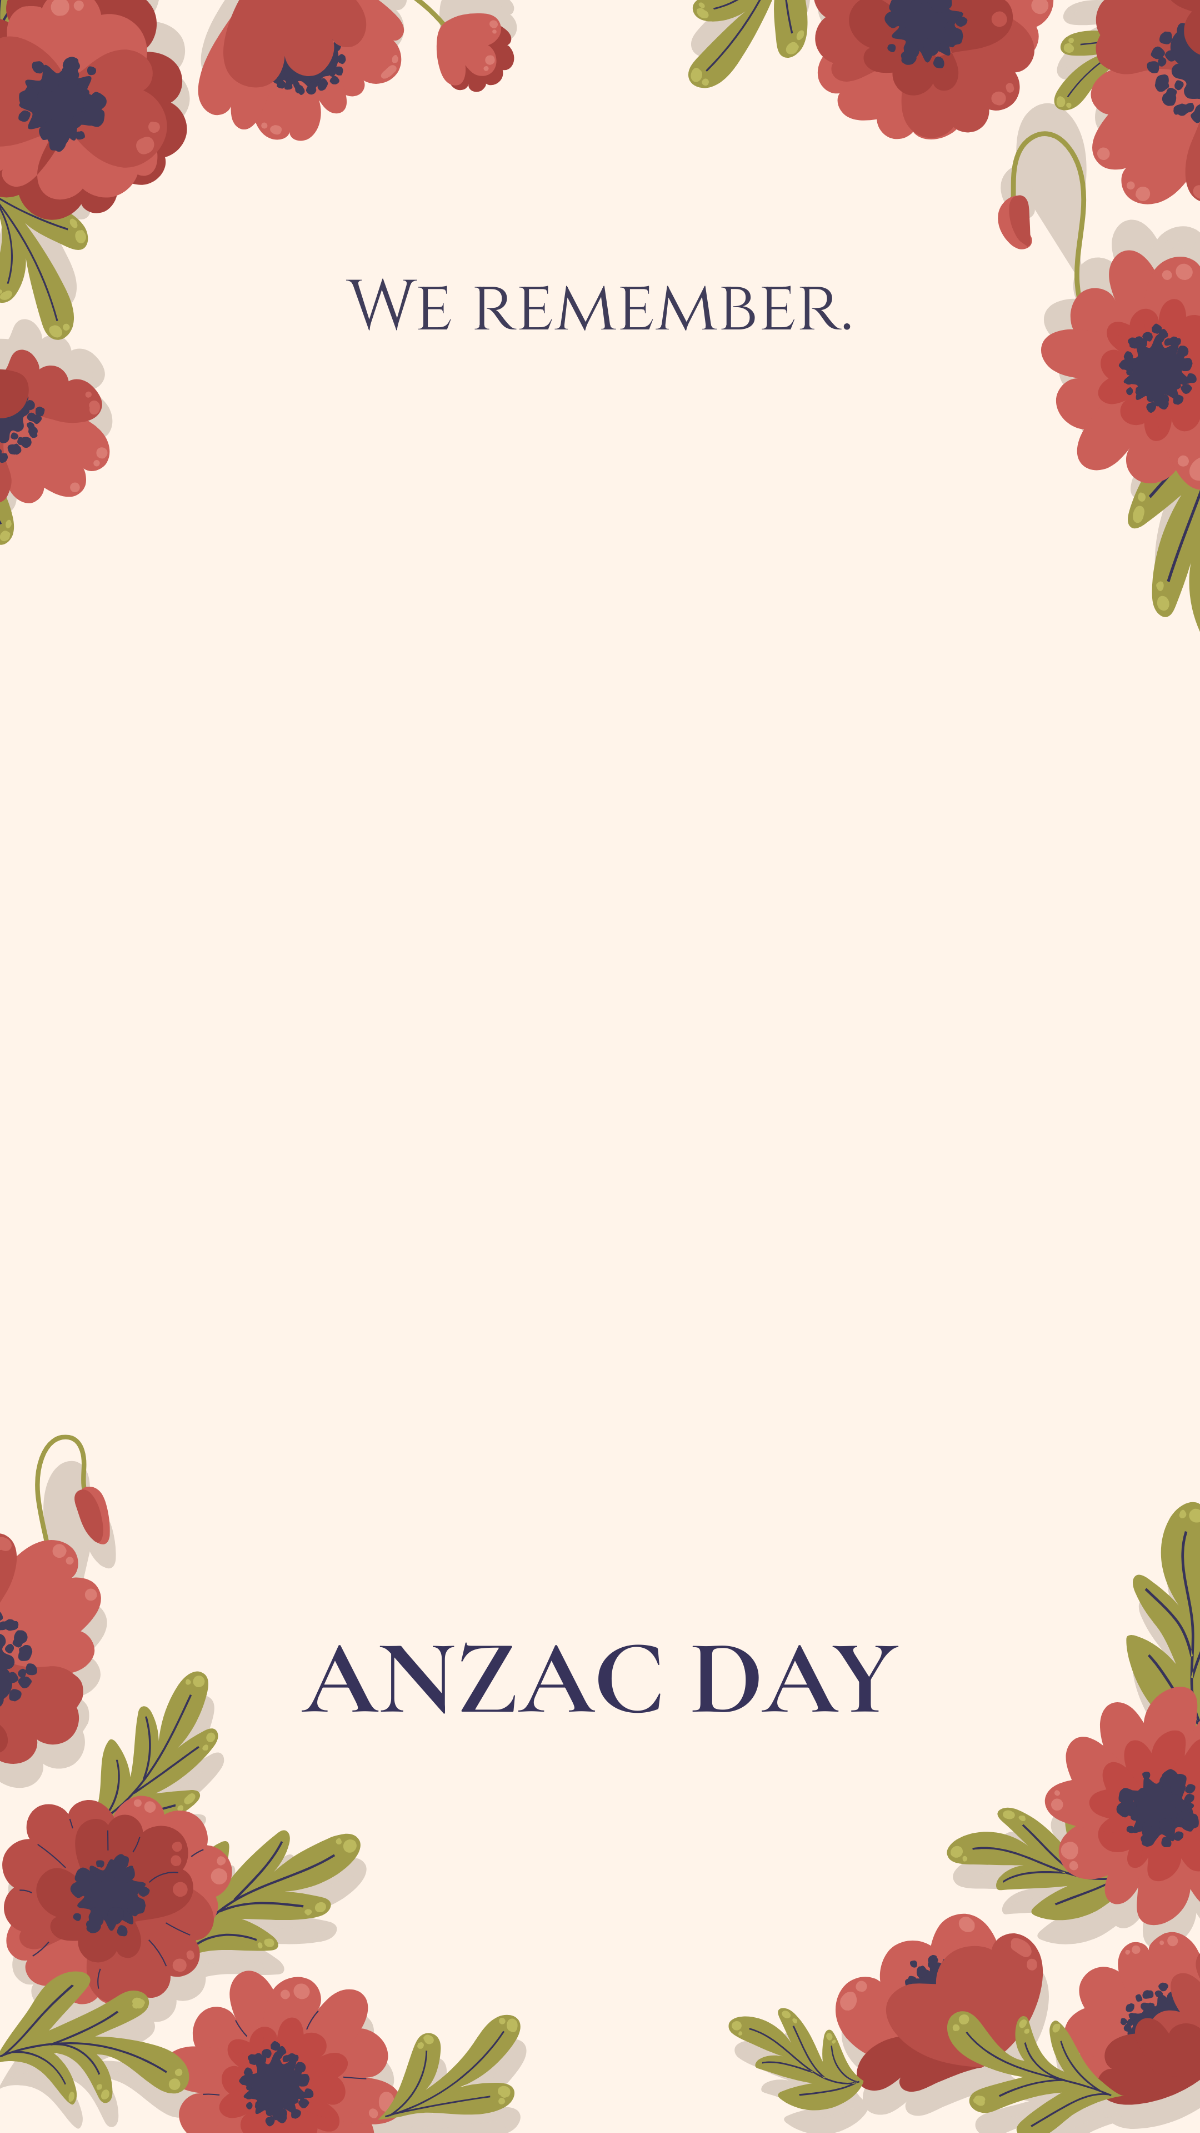 Anzac Day Snapchat Geofilter